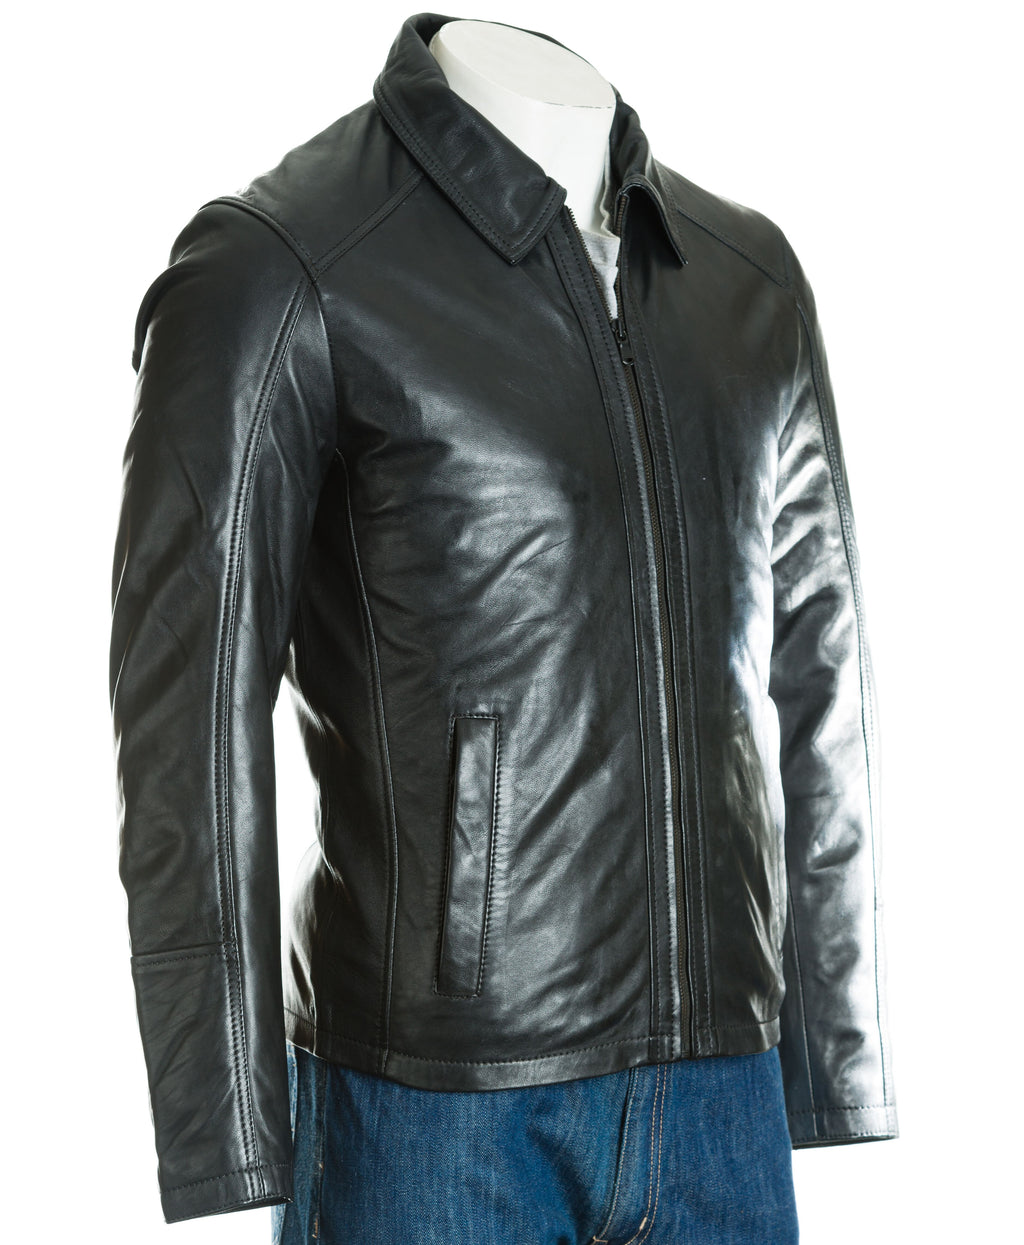 Men's Slim Fit Collared Leather Jacket: Pepe